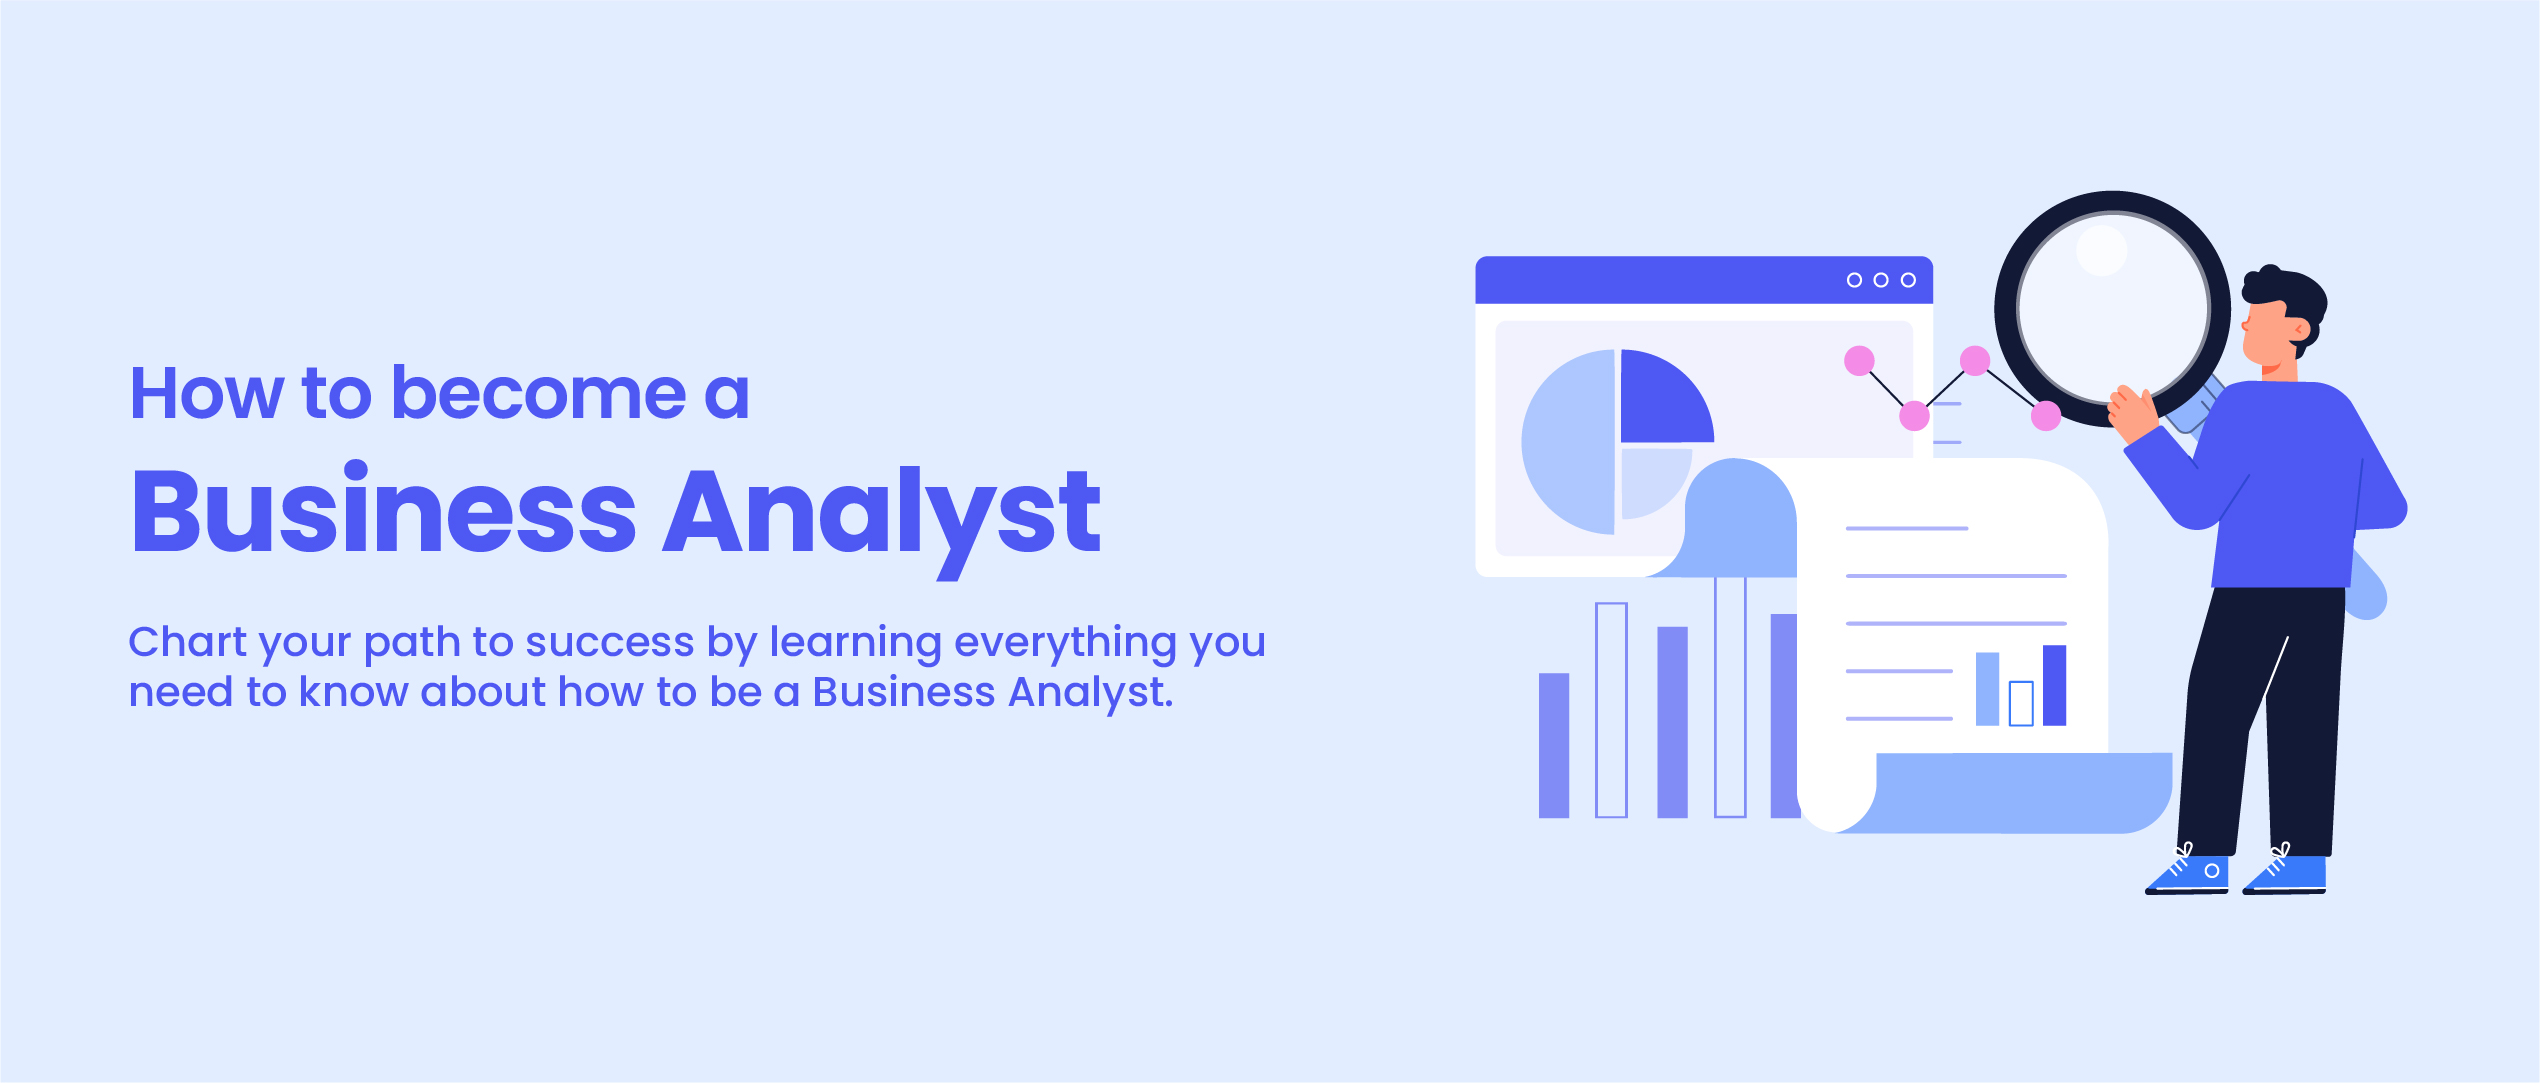 How to become a business analyst?